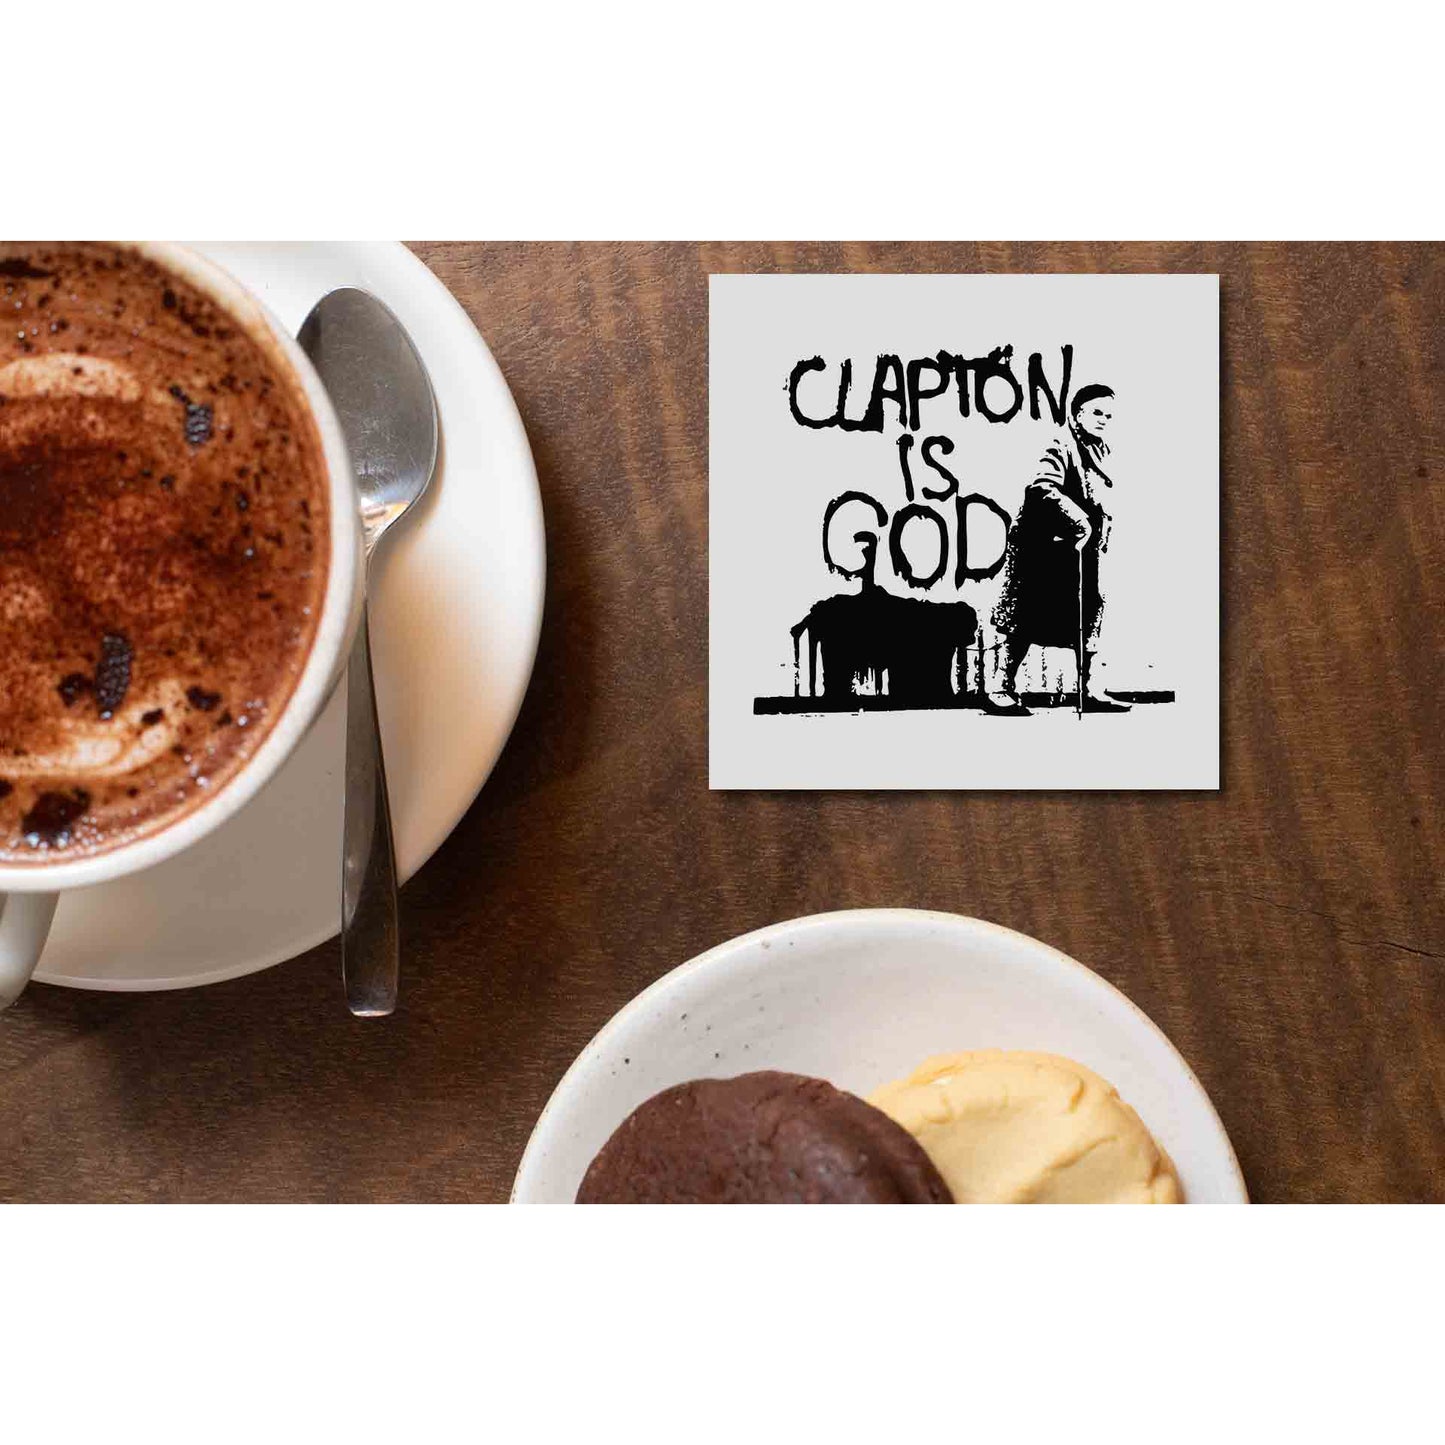 eric clapton clapton is god coasters wooden table cups indian music band buy online india the banyan tee tbt men women girls boys unisex